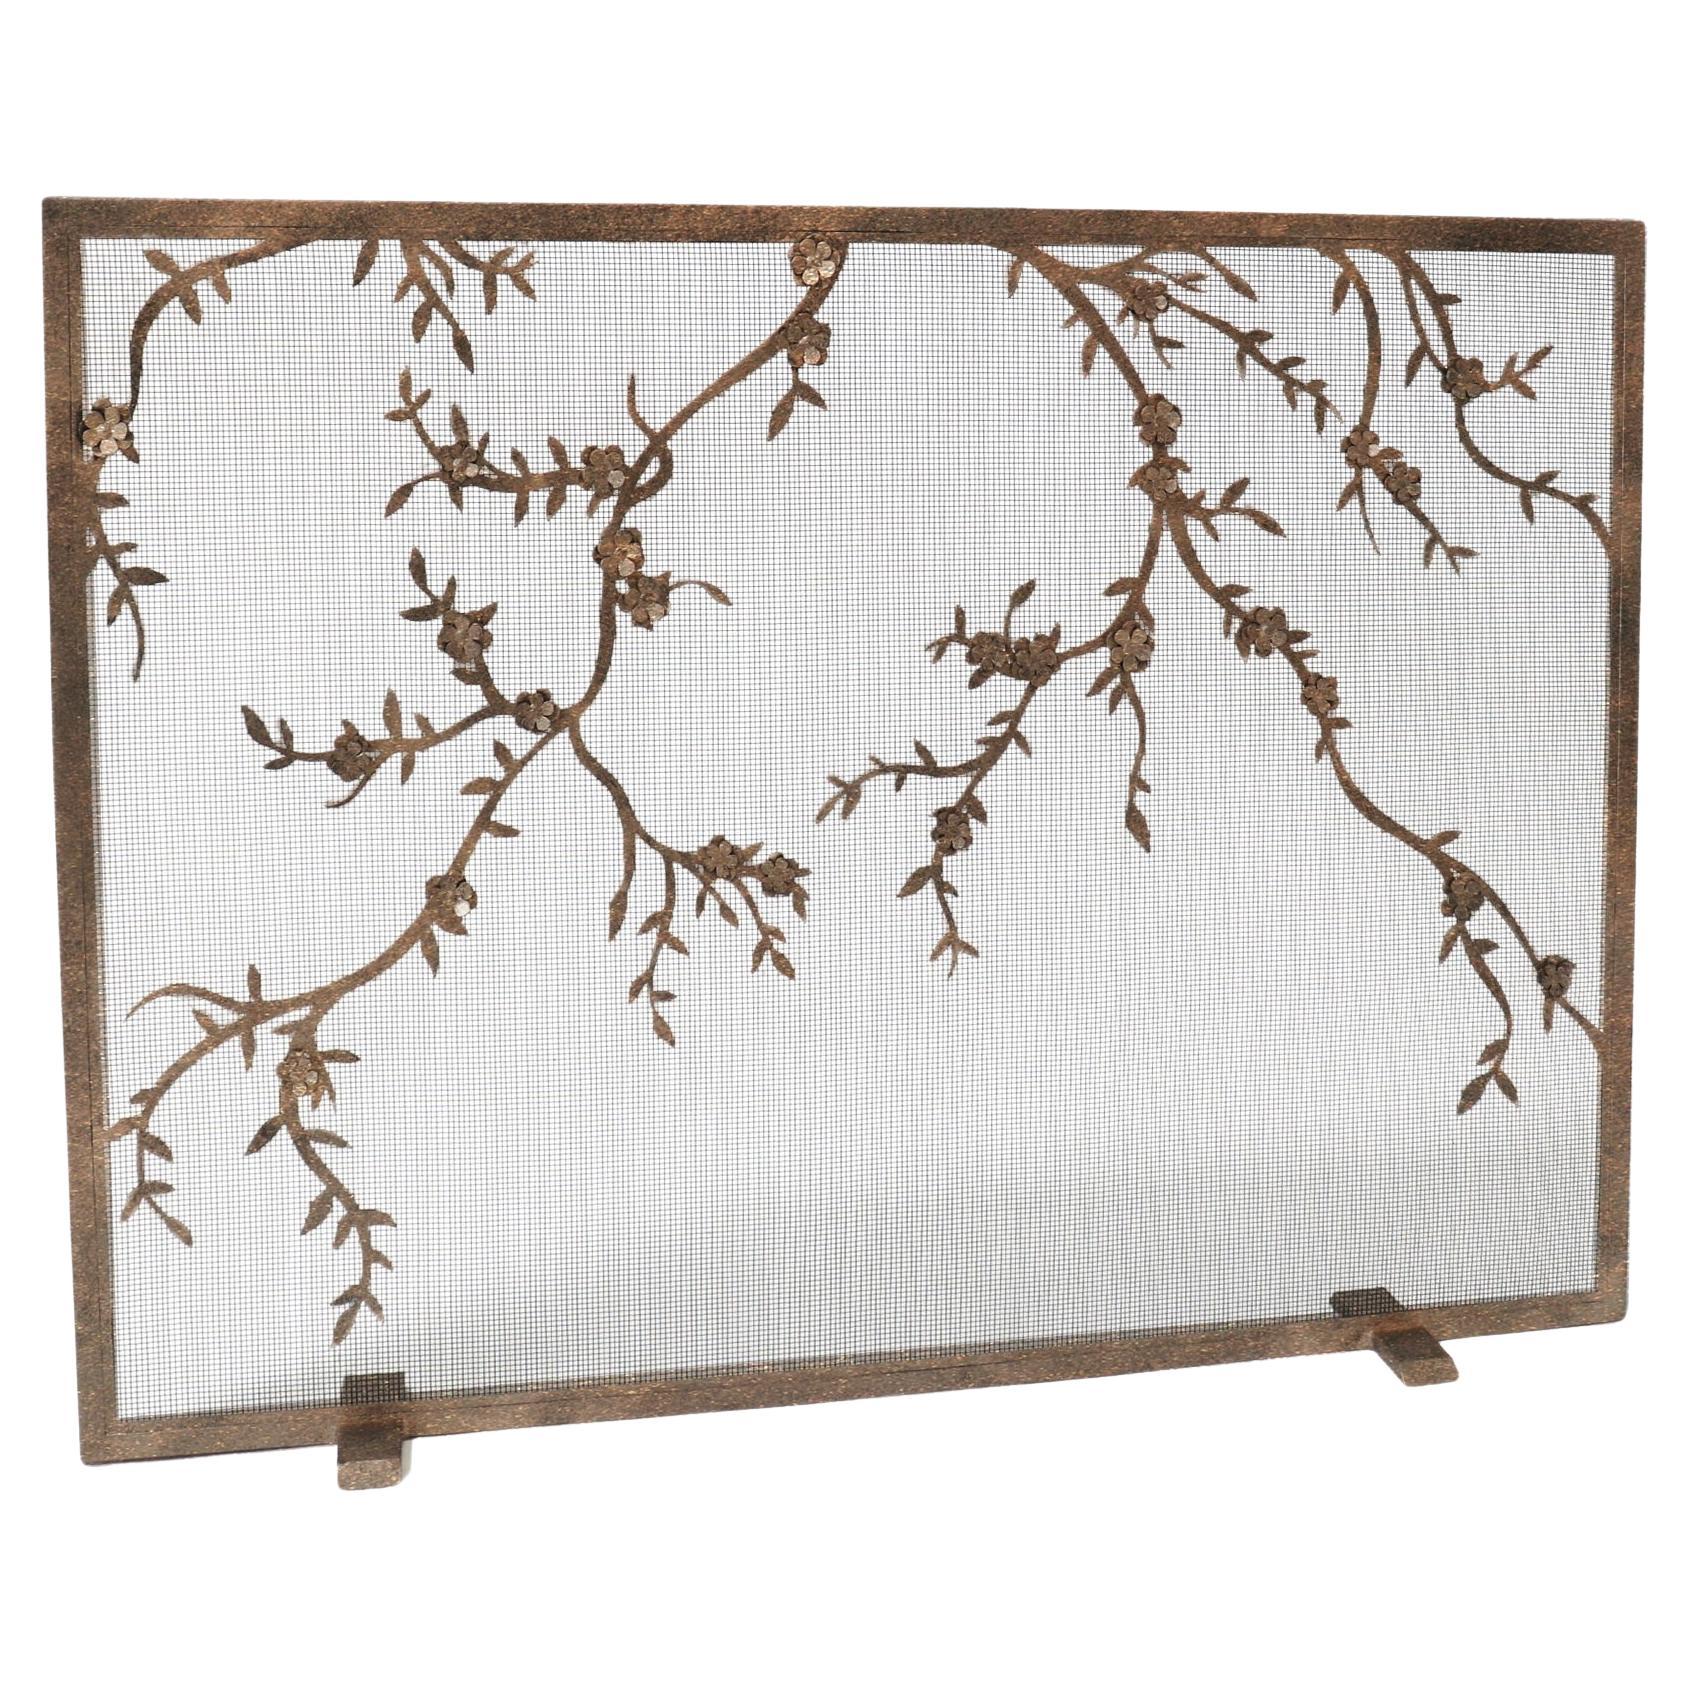 Plum Blossom Fireplace Screen in Tobacco